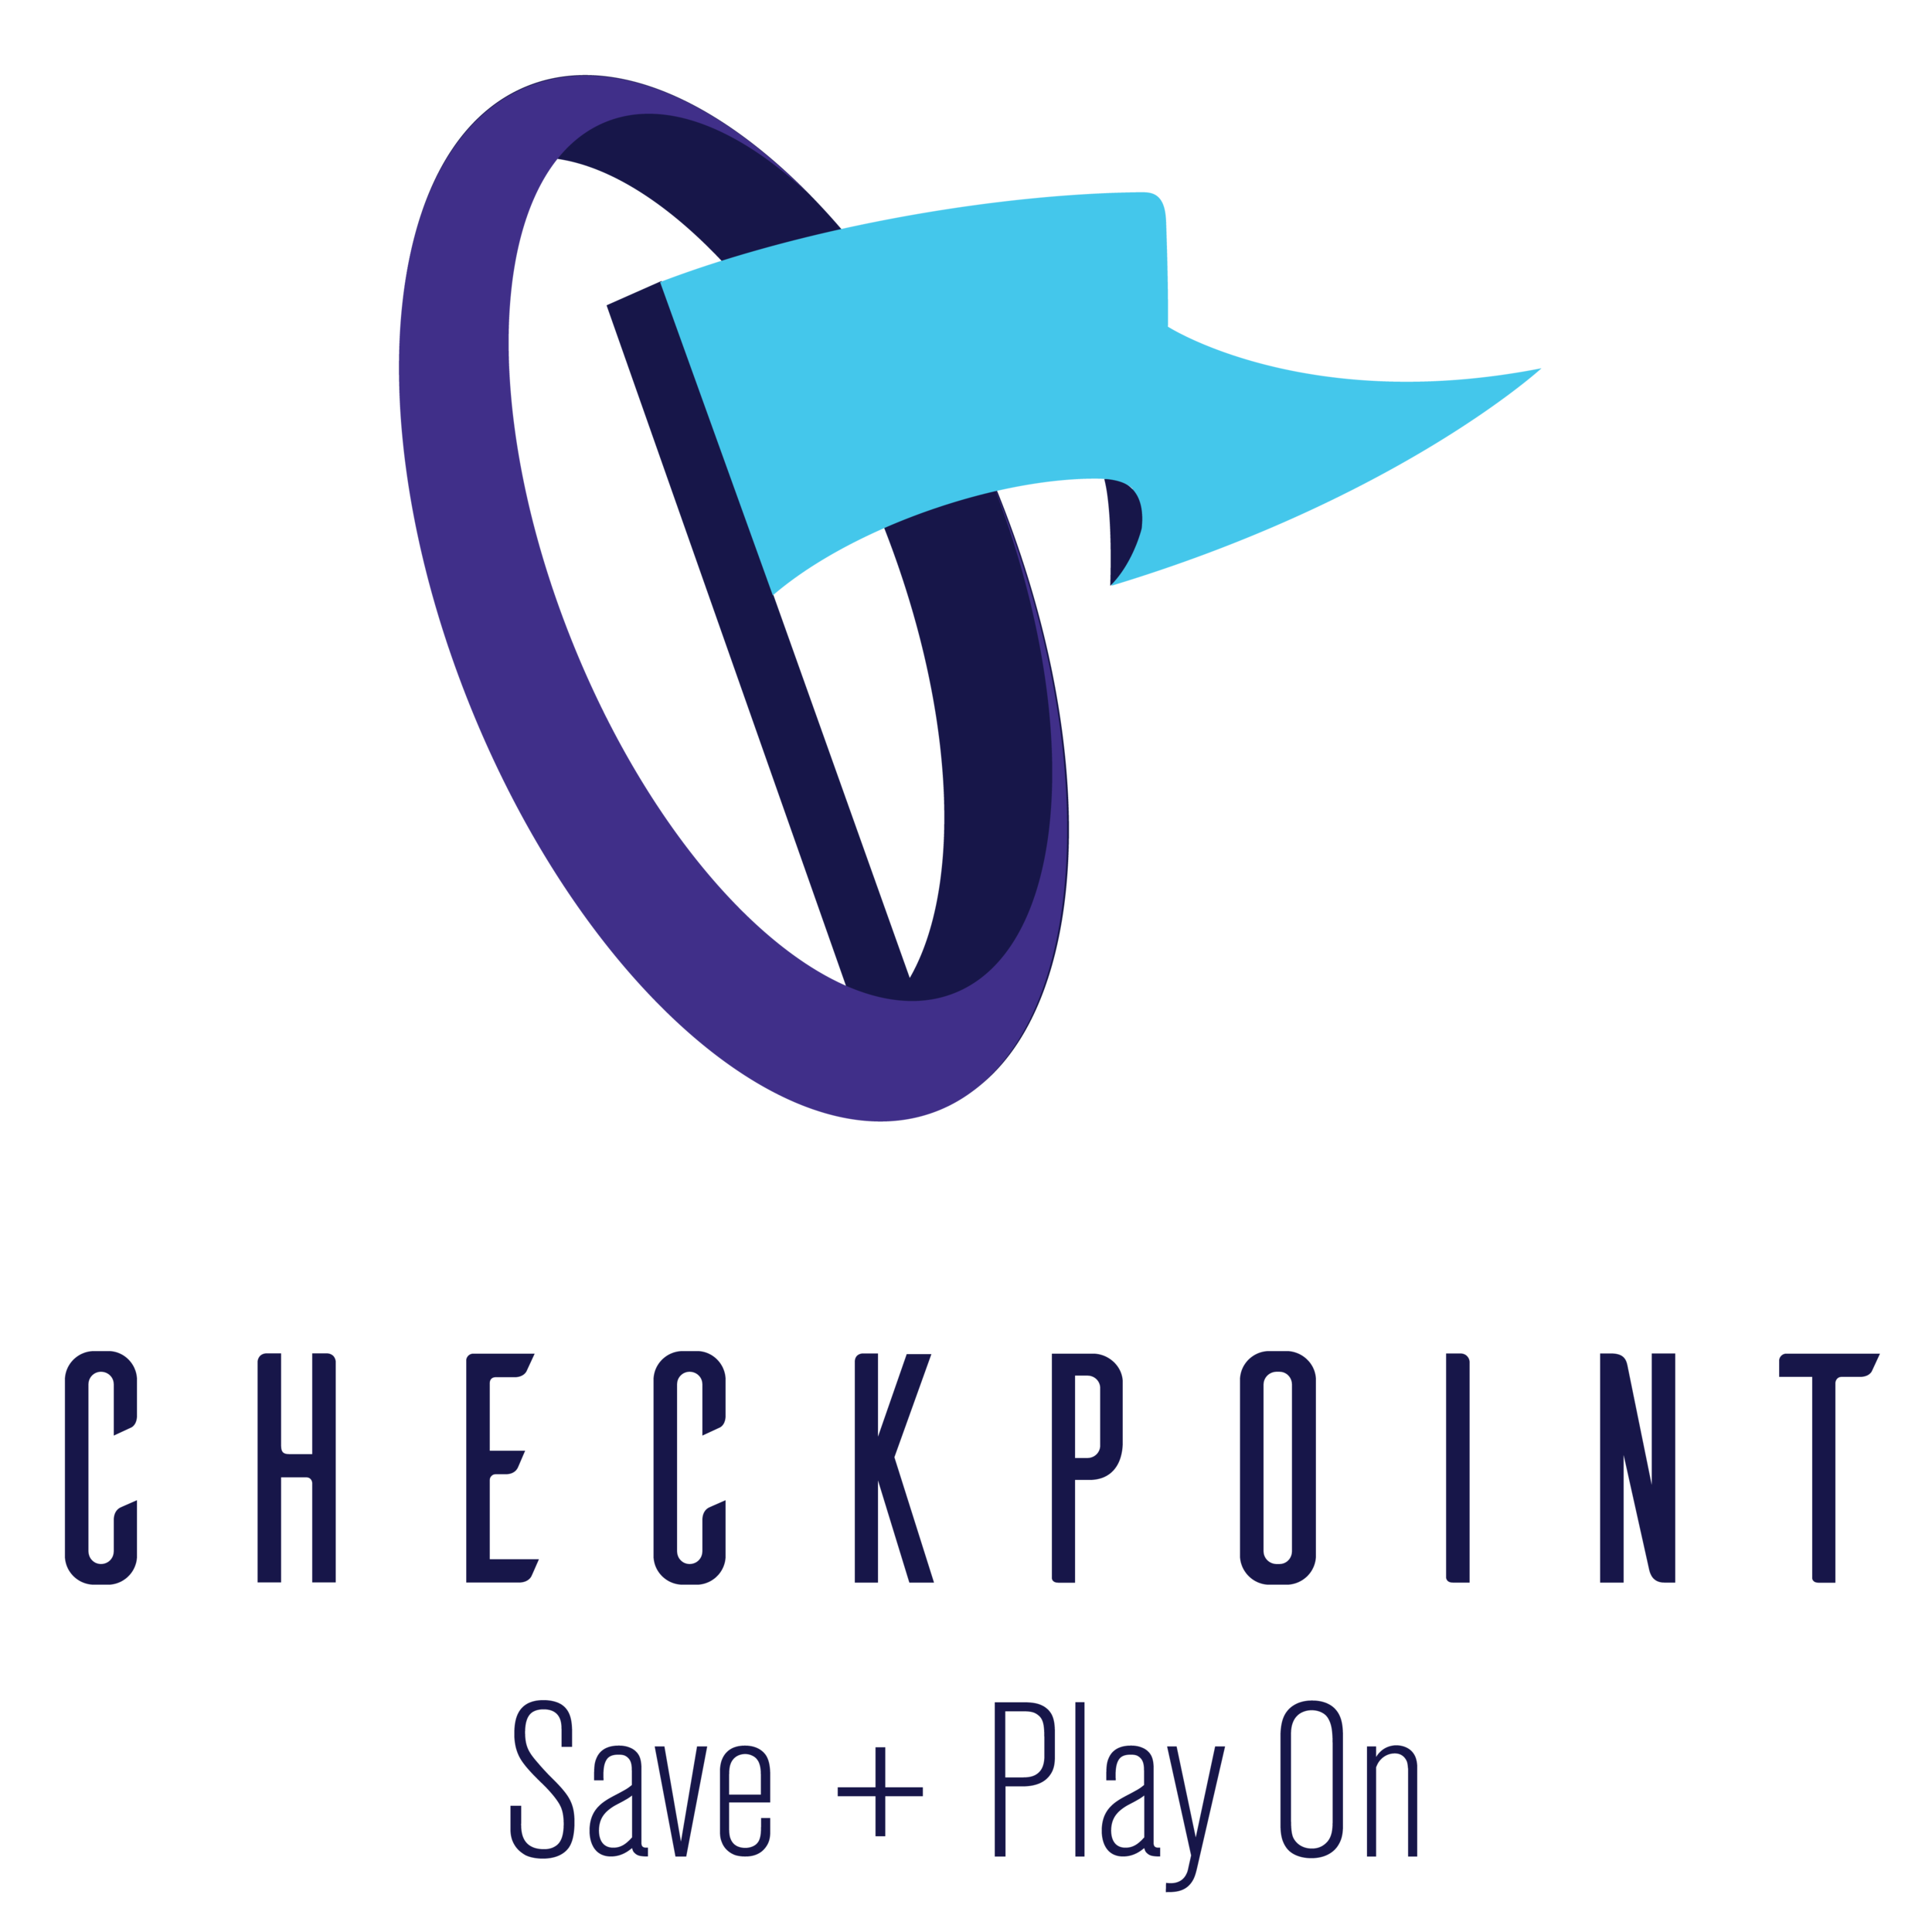 Checkpoint_Logo_Square_01-01 copy.png